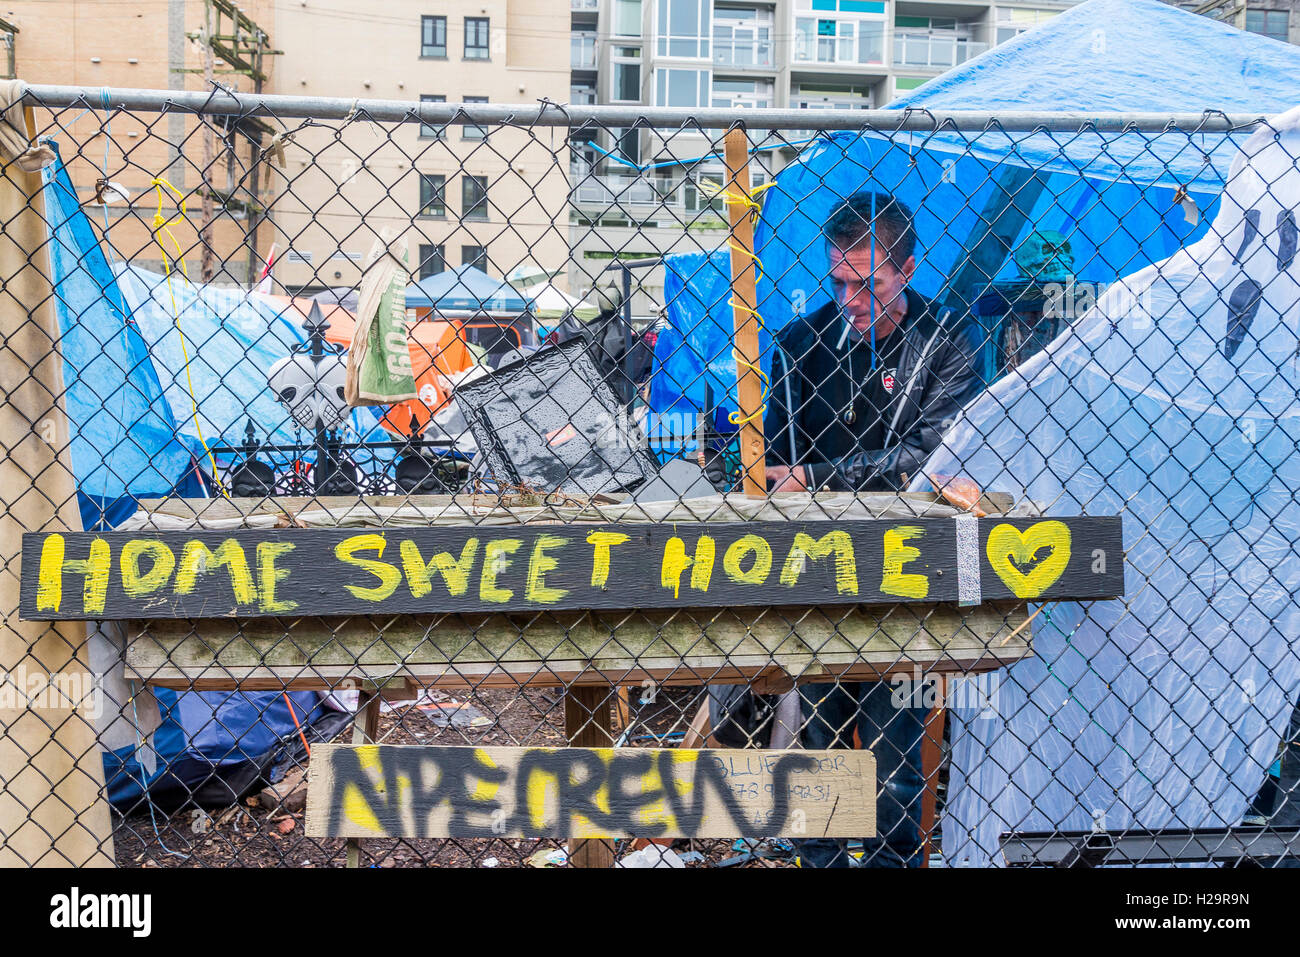 Dtes Homeless Tent City On Hastings Street Downtown East Side Vancouver British Columbia Canada Credit Michael Wheatley Alamy Live News Stock Photo Alamy